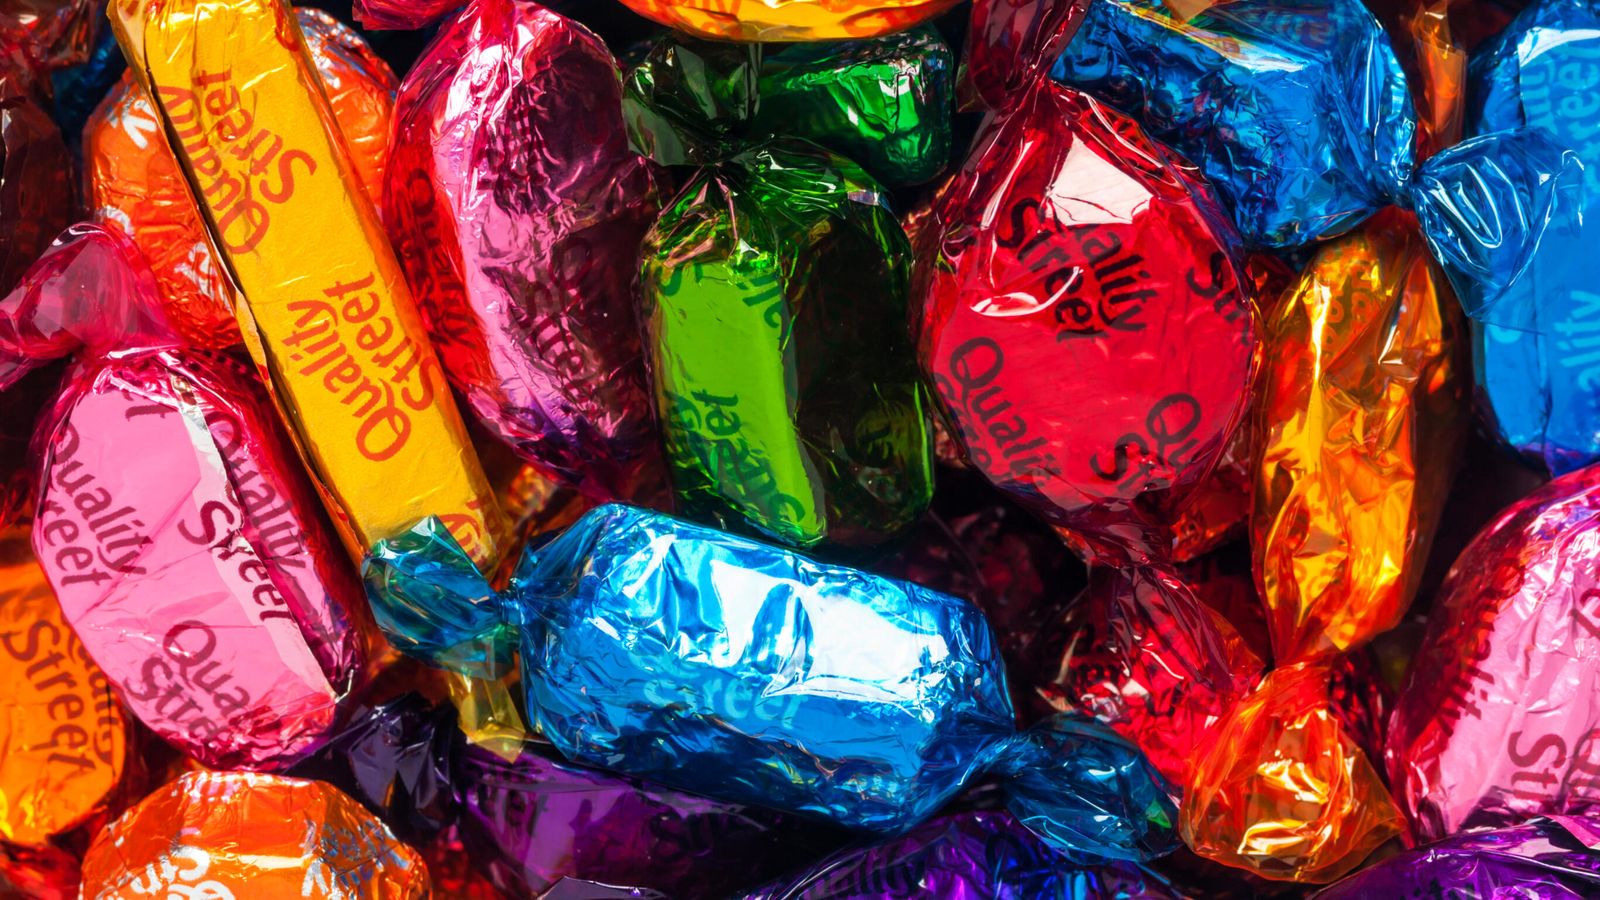 Quality Street axes famous plastic wrappers on chocolates after 86